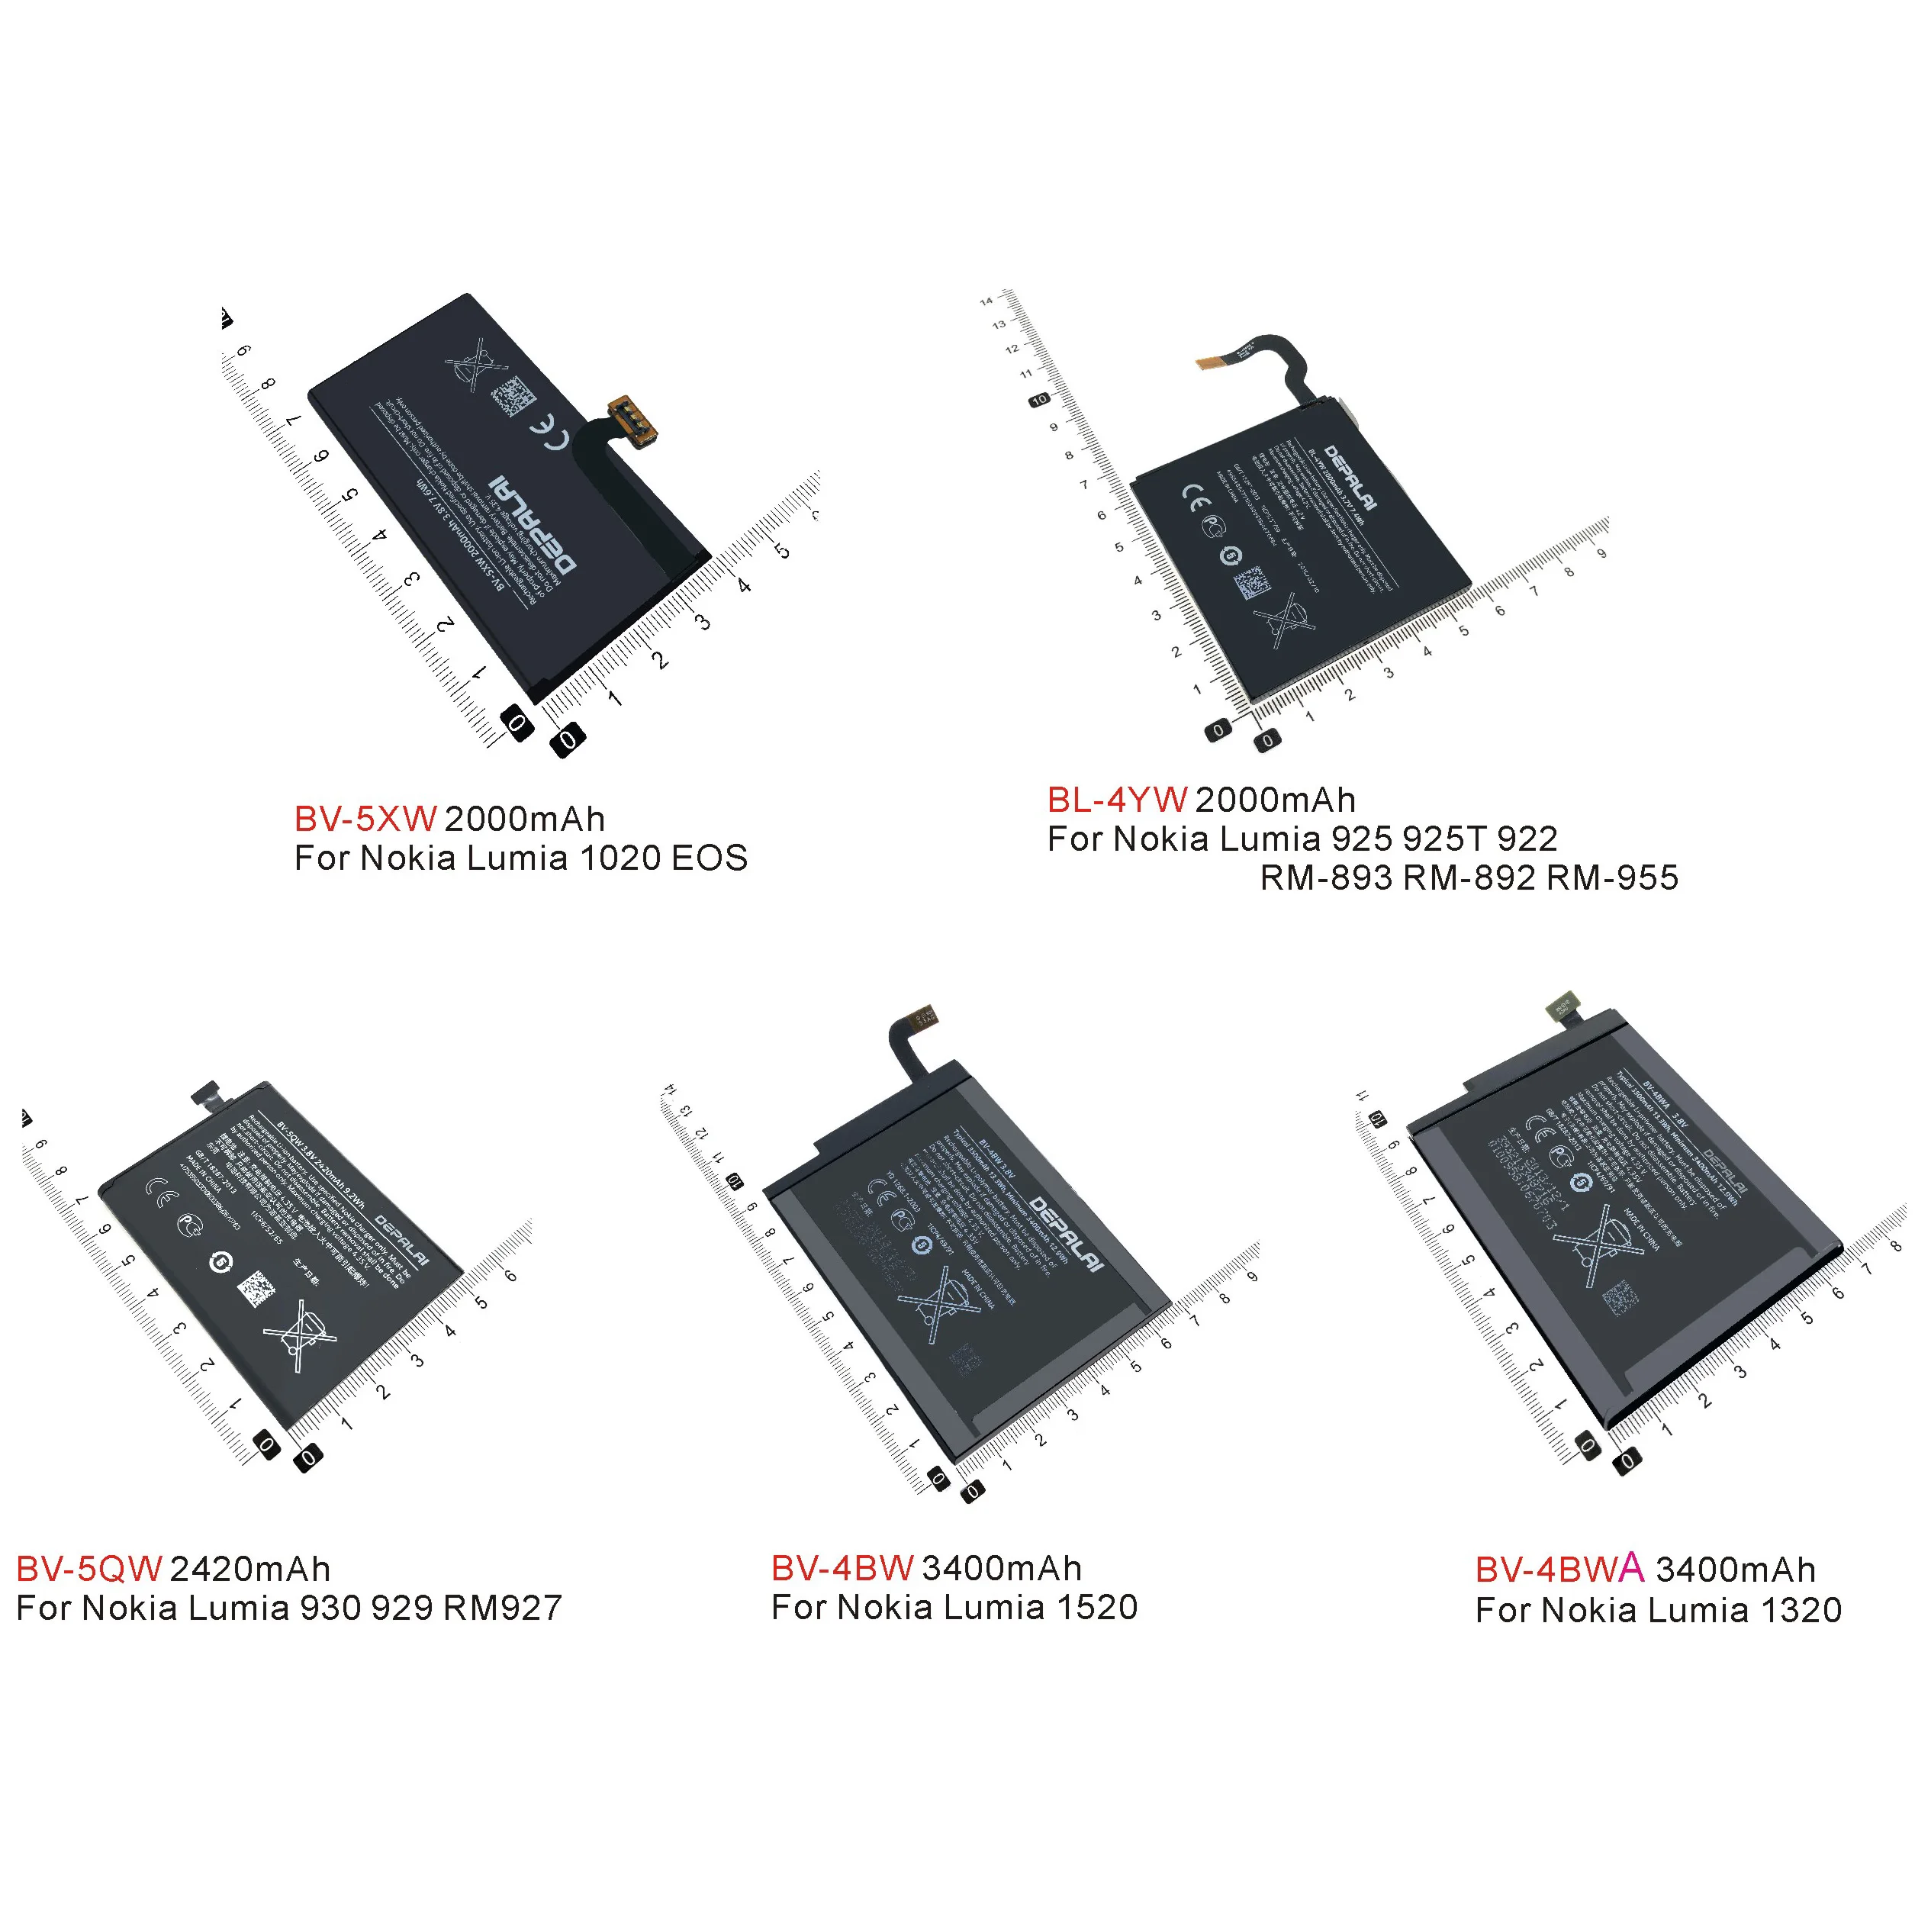 

BL-4YW BV-4BW BV-4BWA BV-5QW BV-5XW Battery For Nokia 925 1020 922 RM-893 RM-892 RM-955 1520 1320 930 929 RM927 mobile battery